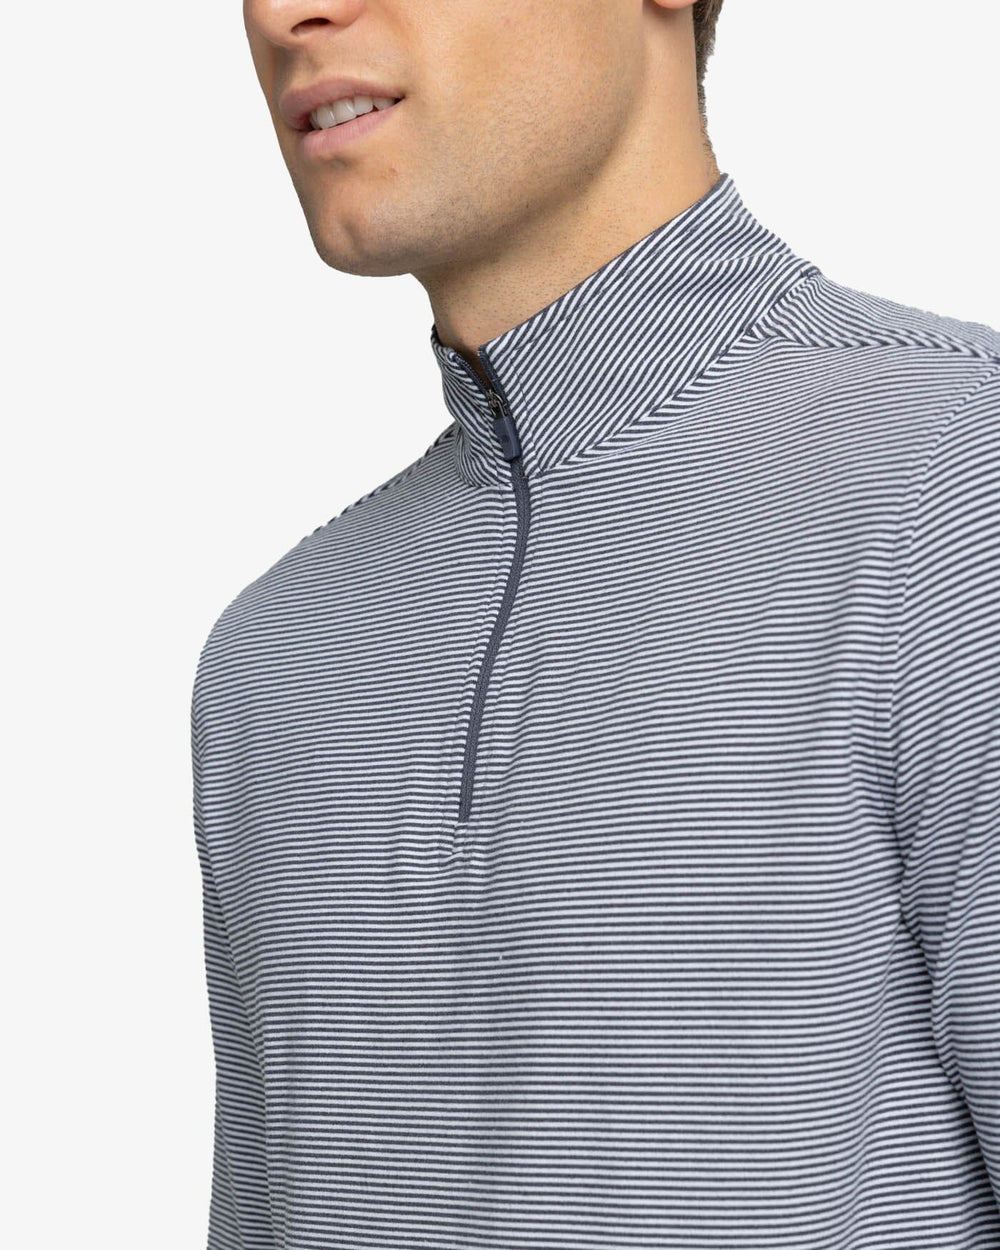 The detail view of the Southern Tide Cruiser Micro-Stripe Heather Quarter Zip by Southern Tide - Heather Black